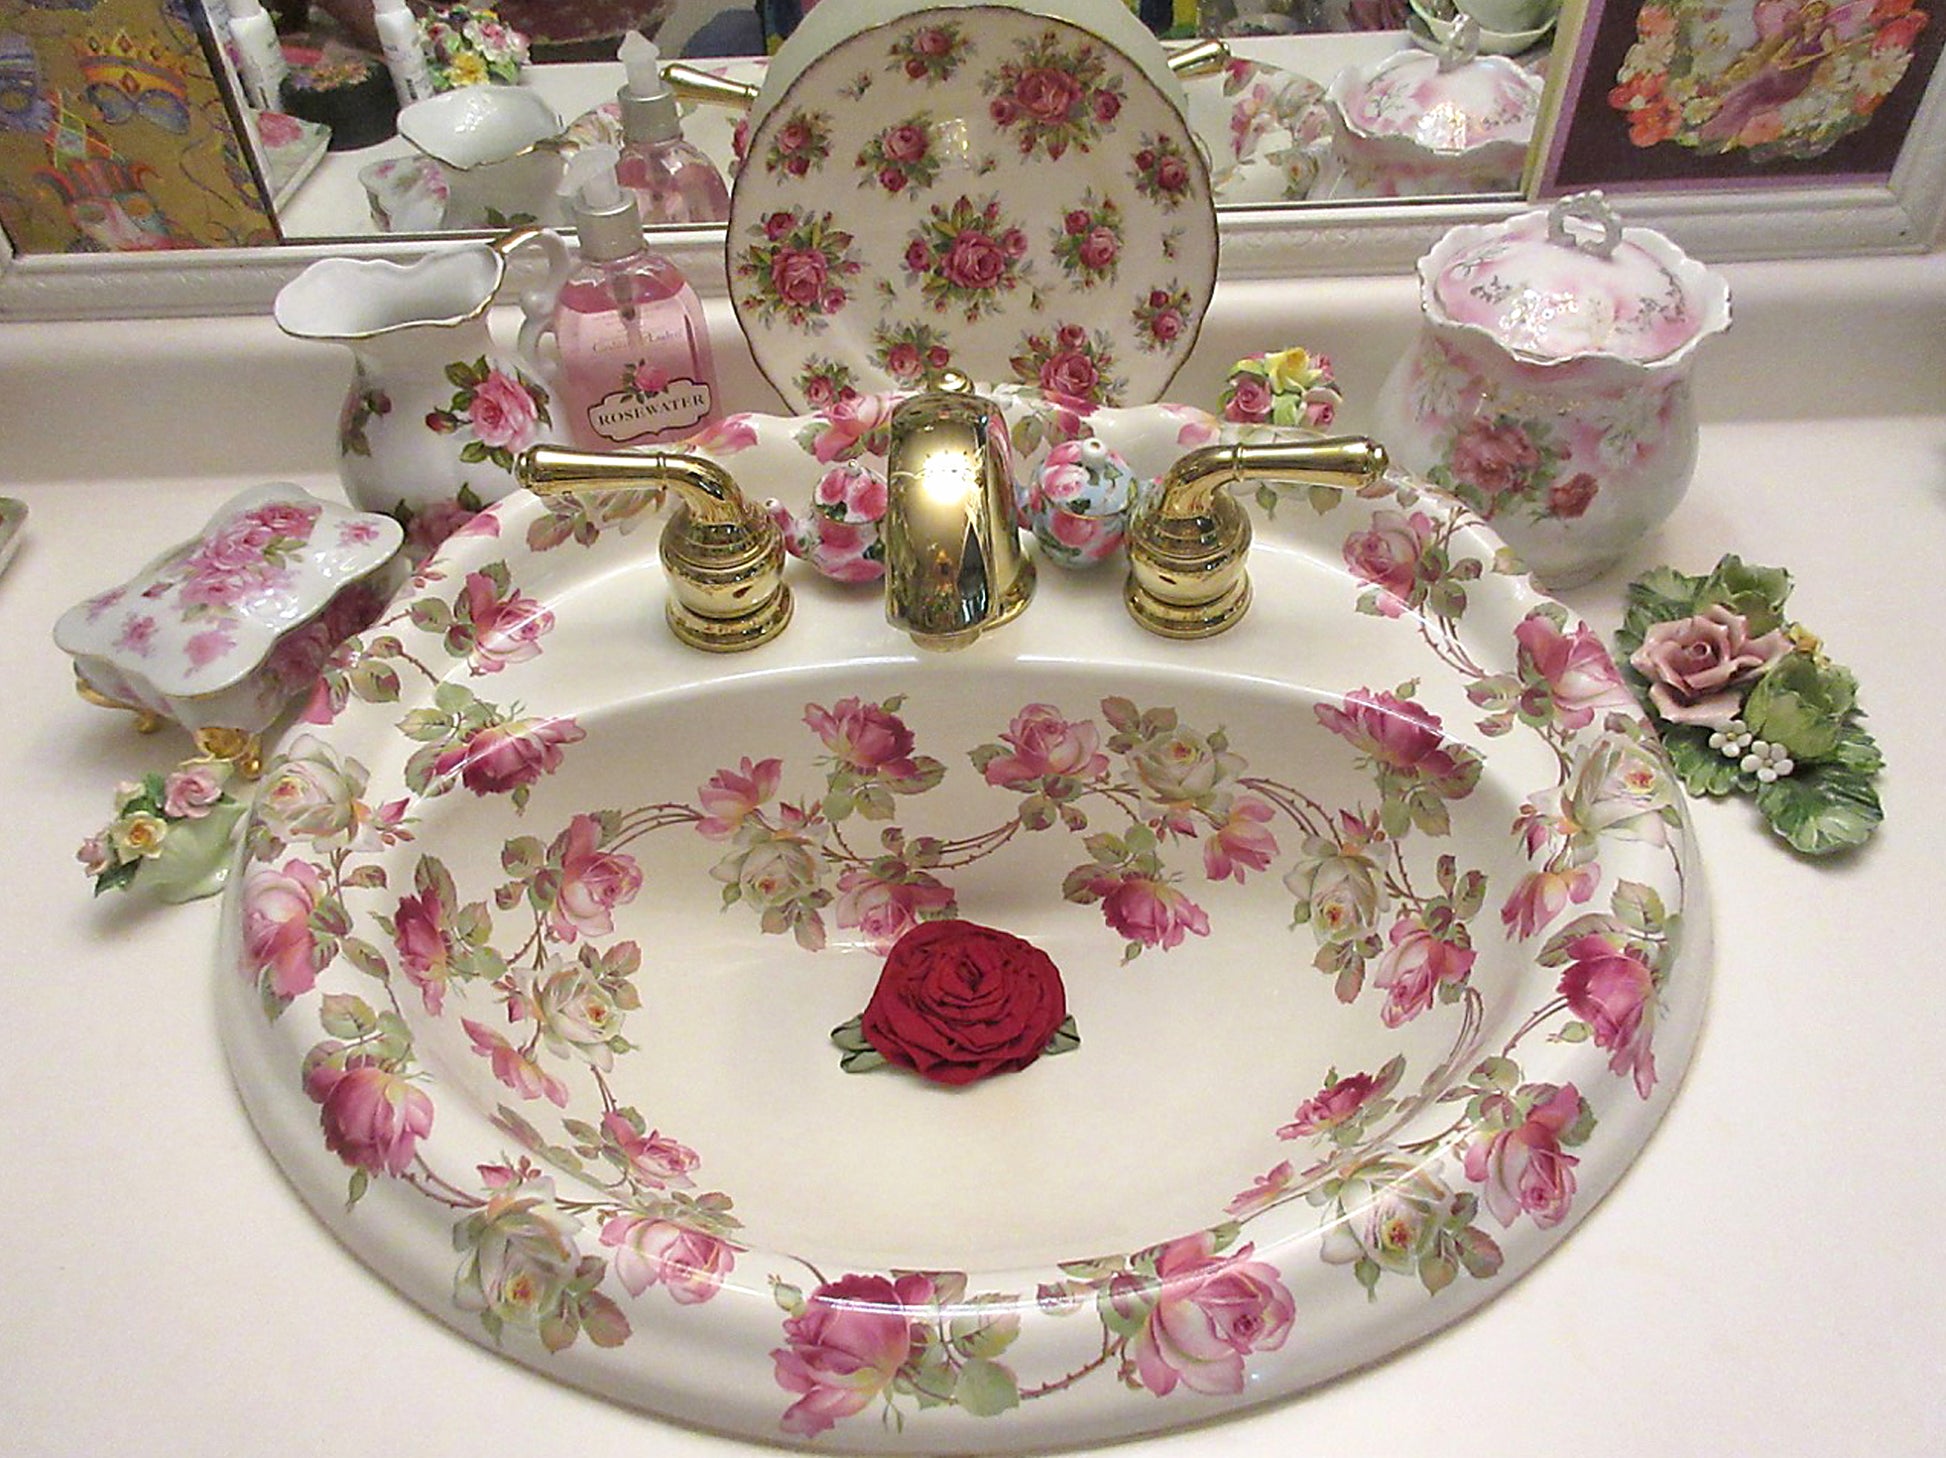 Fancy bathroom sink painted with roses